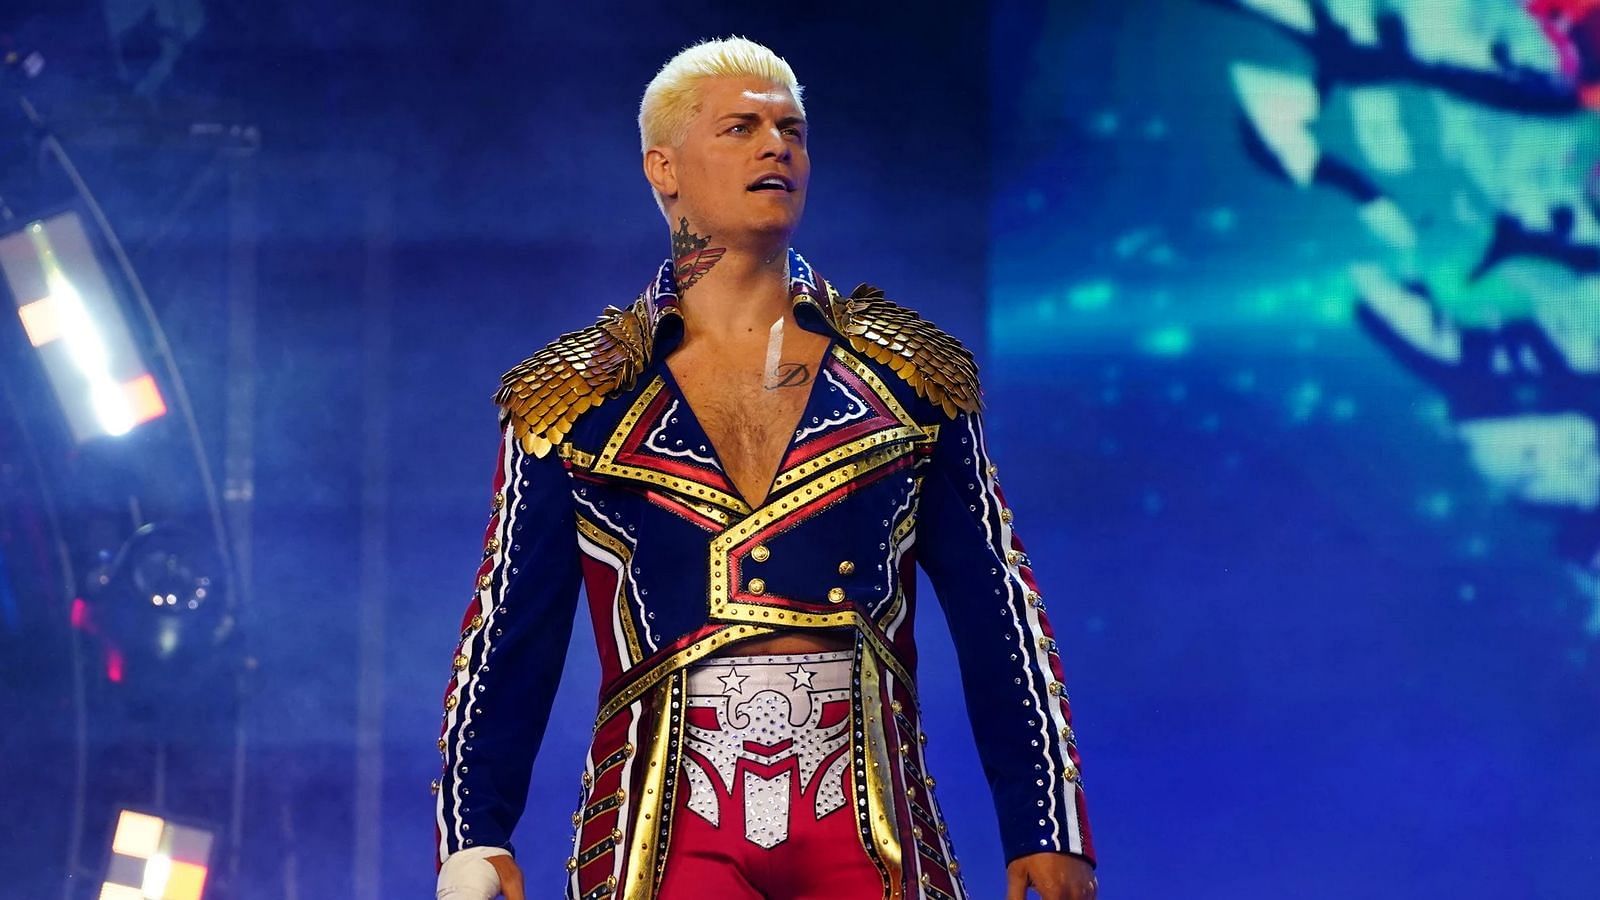 AEW's Cody Rhodes wanted to sign Wardlow